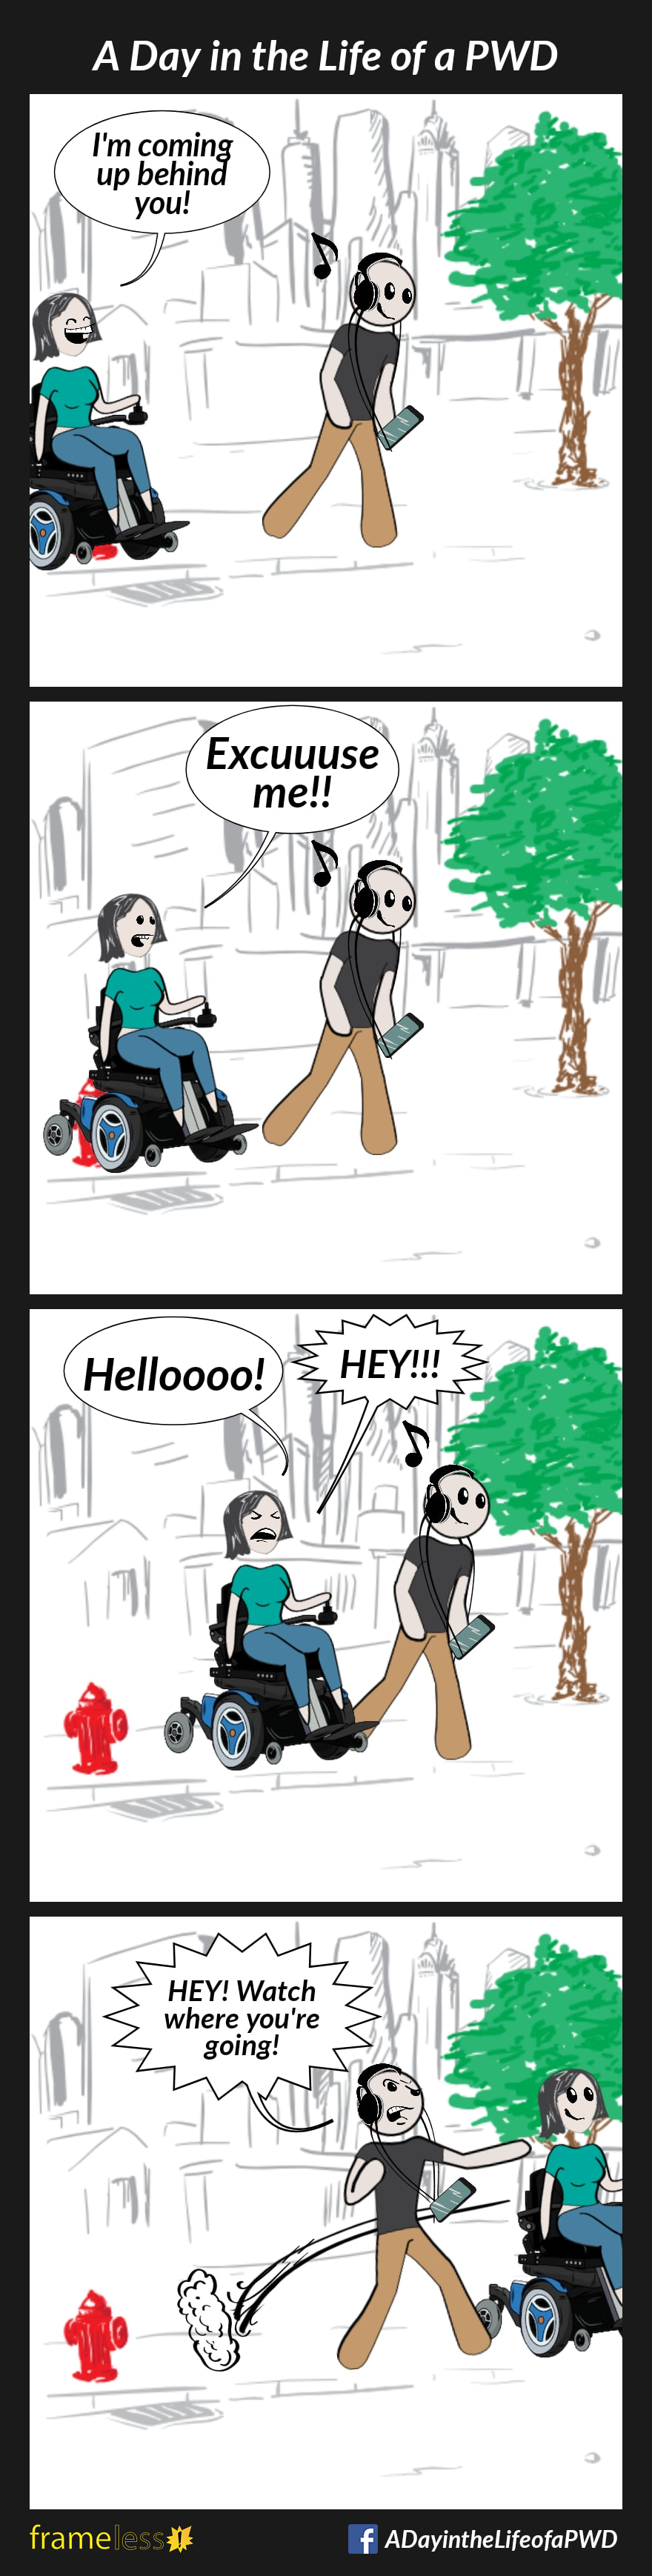 COMIC STRIP 
A Day in the Life of a PWD (Person With a Disability) 

Frame 1:
A woman in a power wheelchair traveling on a sidewalk is approaching a man from behind. 
WOMAN: I'm coming up behind you!
The man is listening to loud music on headphones, and doesn't hear her.

Frame 2:
WOMAN: Excuuuse me!!
The man still doesn't hear.

Frame 3:
WOMAN: Helloooo! HEY!!!
The man still doesn't respond.

Frame 4:
The woman skirts around the man, badly startling him. 
MAN (angry): Hey! Watch where you're going!